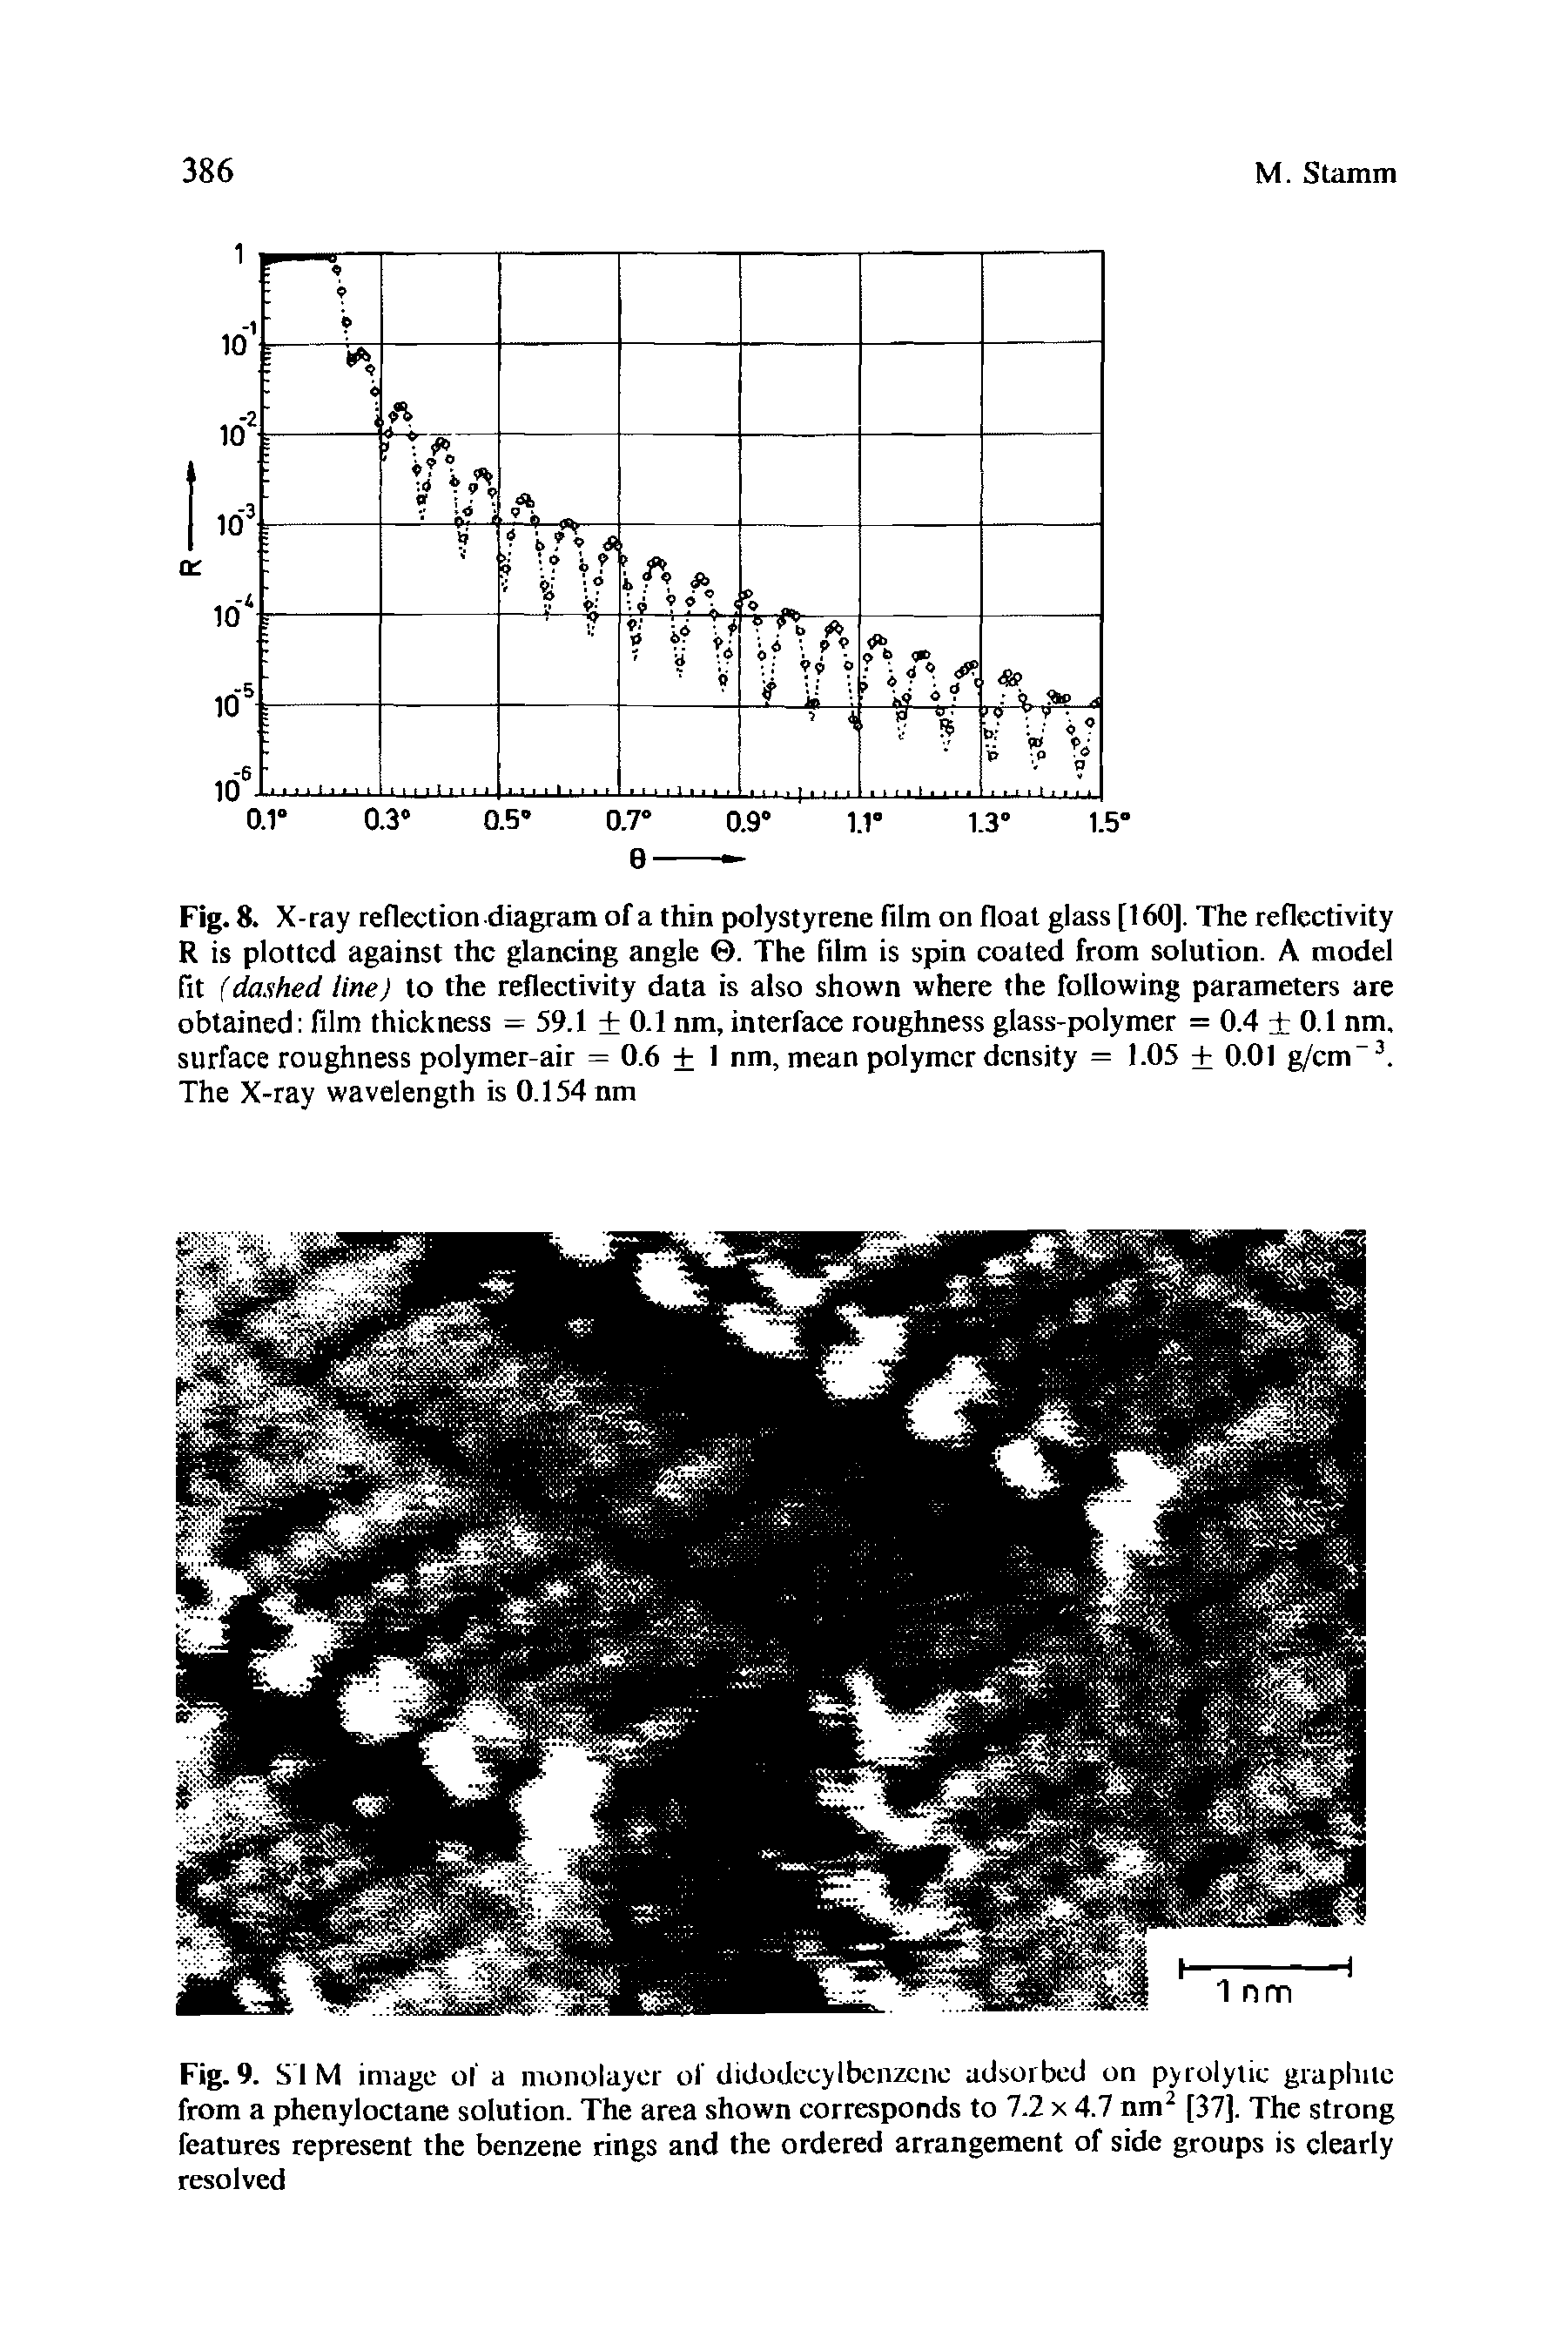 Fig. 8. X-ray reflection diagram of a thin polystyrene film on float glass [160]. The reflectivity R is plotted against the glancing angle . The film is spin coated from solution. A model fit (dashed line) to the reflectivity data is also shown where the following parameters are obtained film thickness = 59.1 0.1 nm, interface roughness glass-polymer = 0.4 0.1 nm, surface roughness polymer-air = 0.6+1 nm, mean polymer density = 1.05 + 0.01 g/cm-3. The X-ray wavelength is 0.154nm...